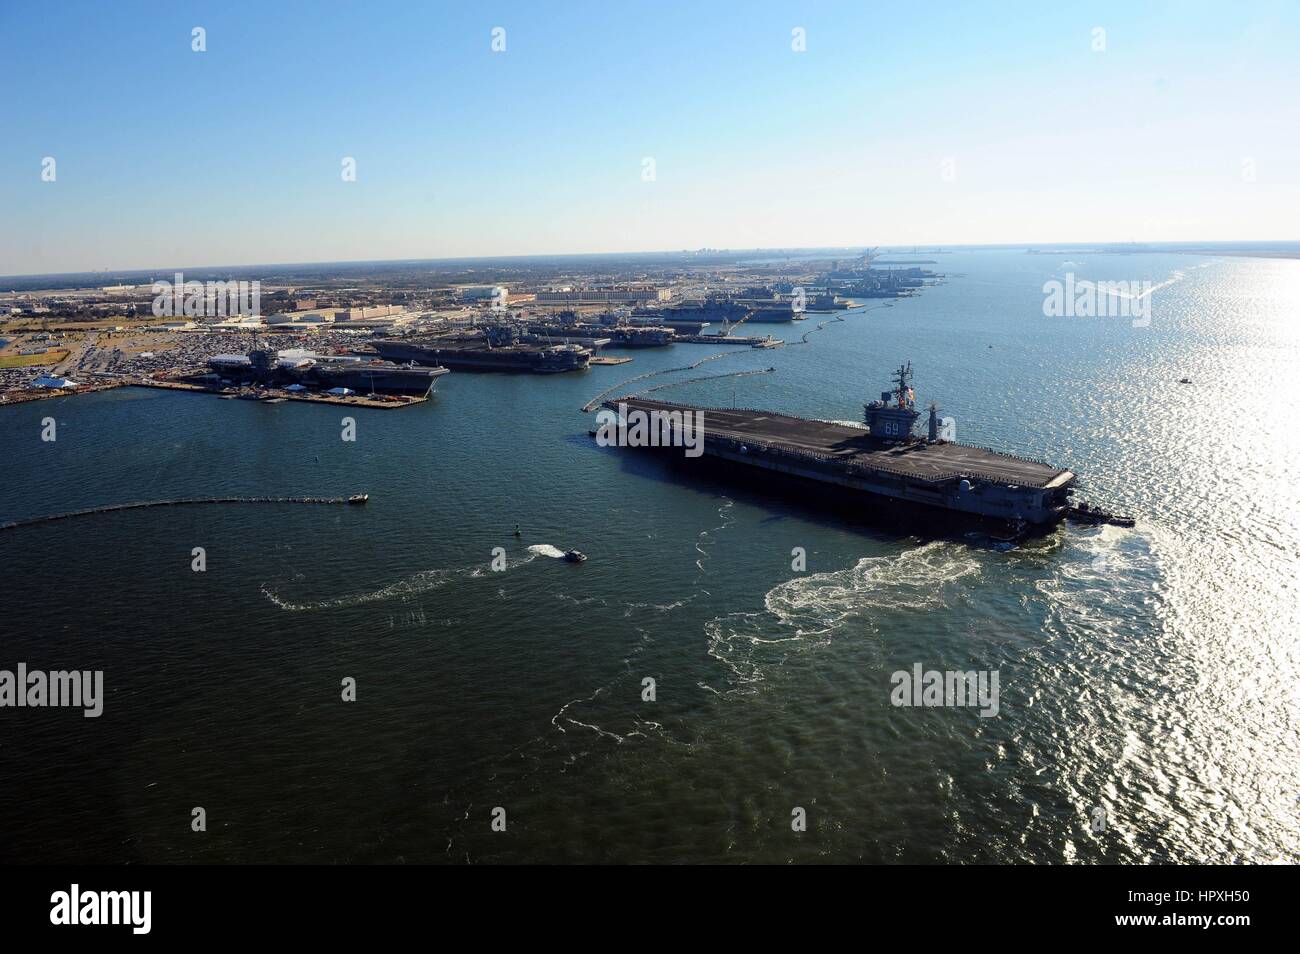 The Nimitz-class aircraft carrier USS Dwight D Eisenhower makes its approach pier side at Naval Station Norfolk, Virginia, December 19, 2012. Image courtesy US Navy Mass Communication Specialist 3rd Class Kevin J Steinberg. Stock Photo